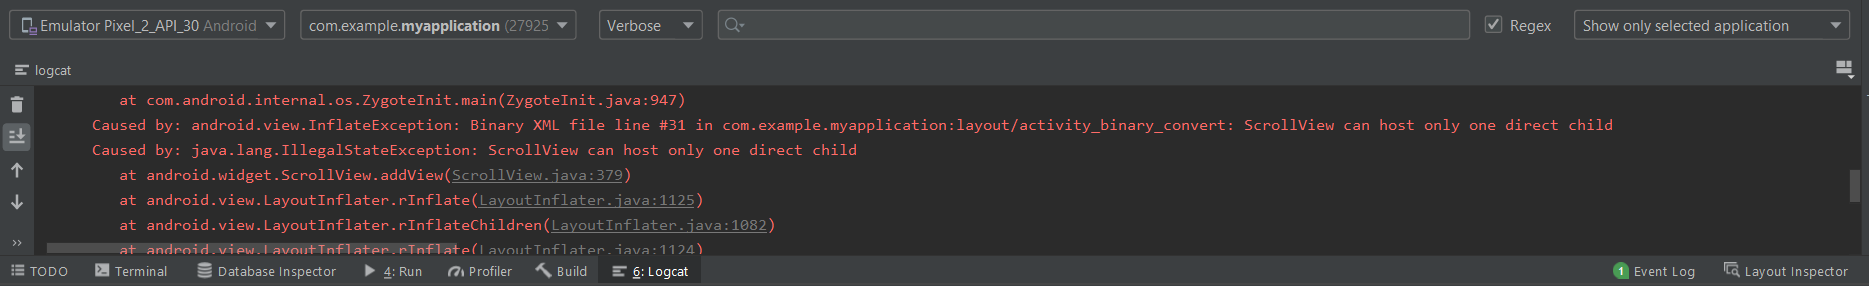 ScrollView can host only one direct child